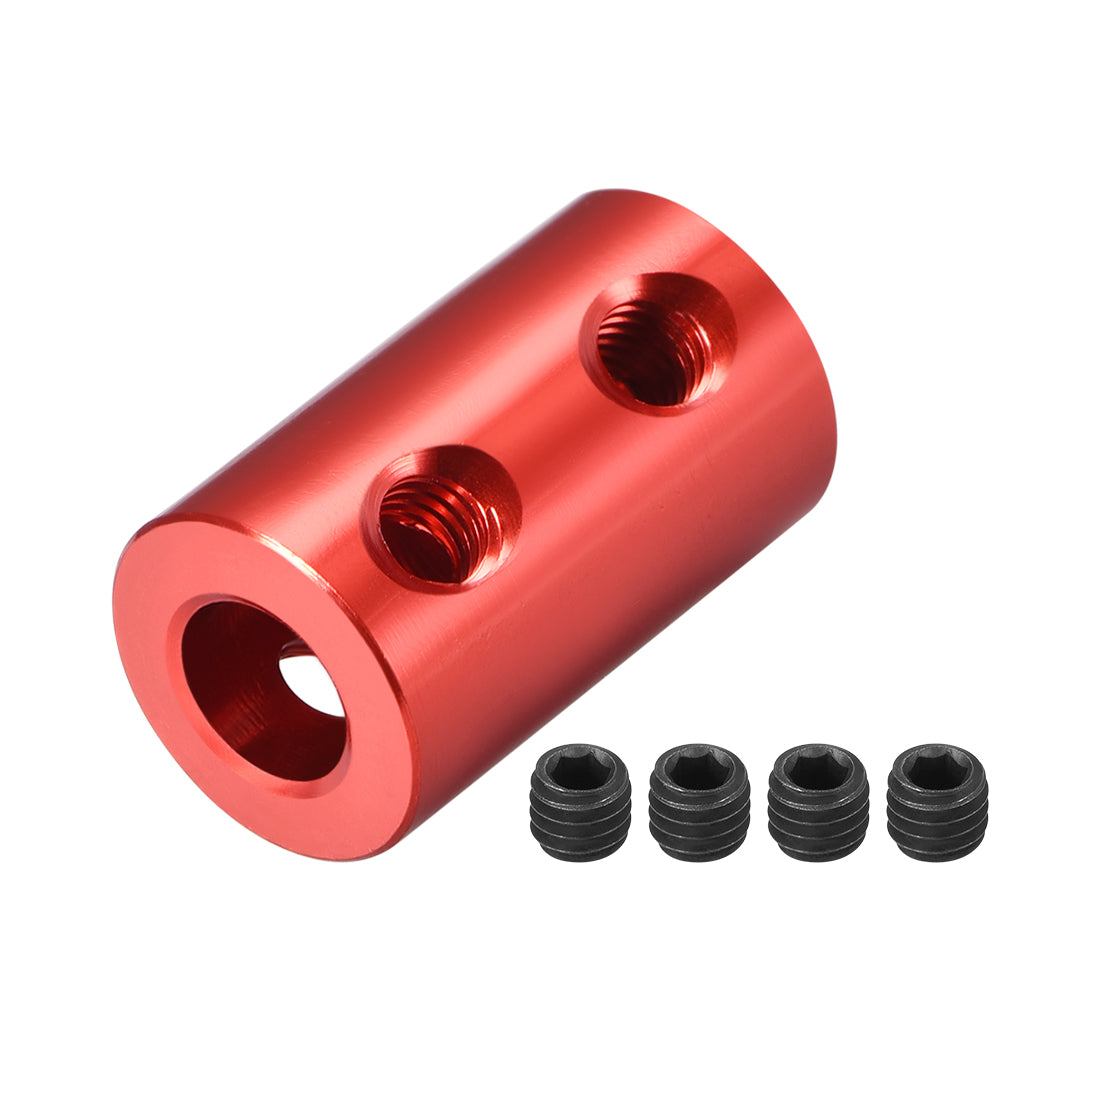 uxcell Uxcell Shaft Coupling 5mm to 6mm Bore L20xD12 Robot Motor Wheel Rigid Coupler Connector Red